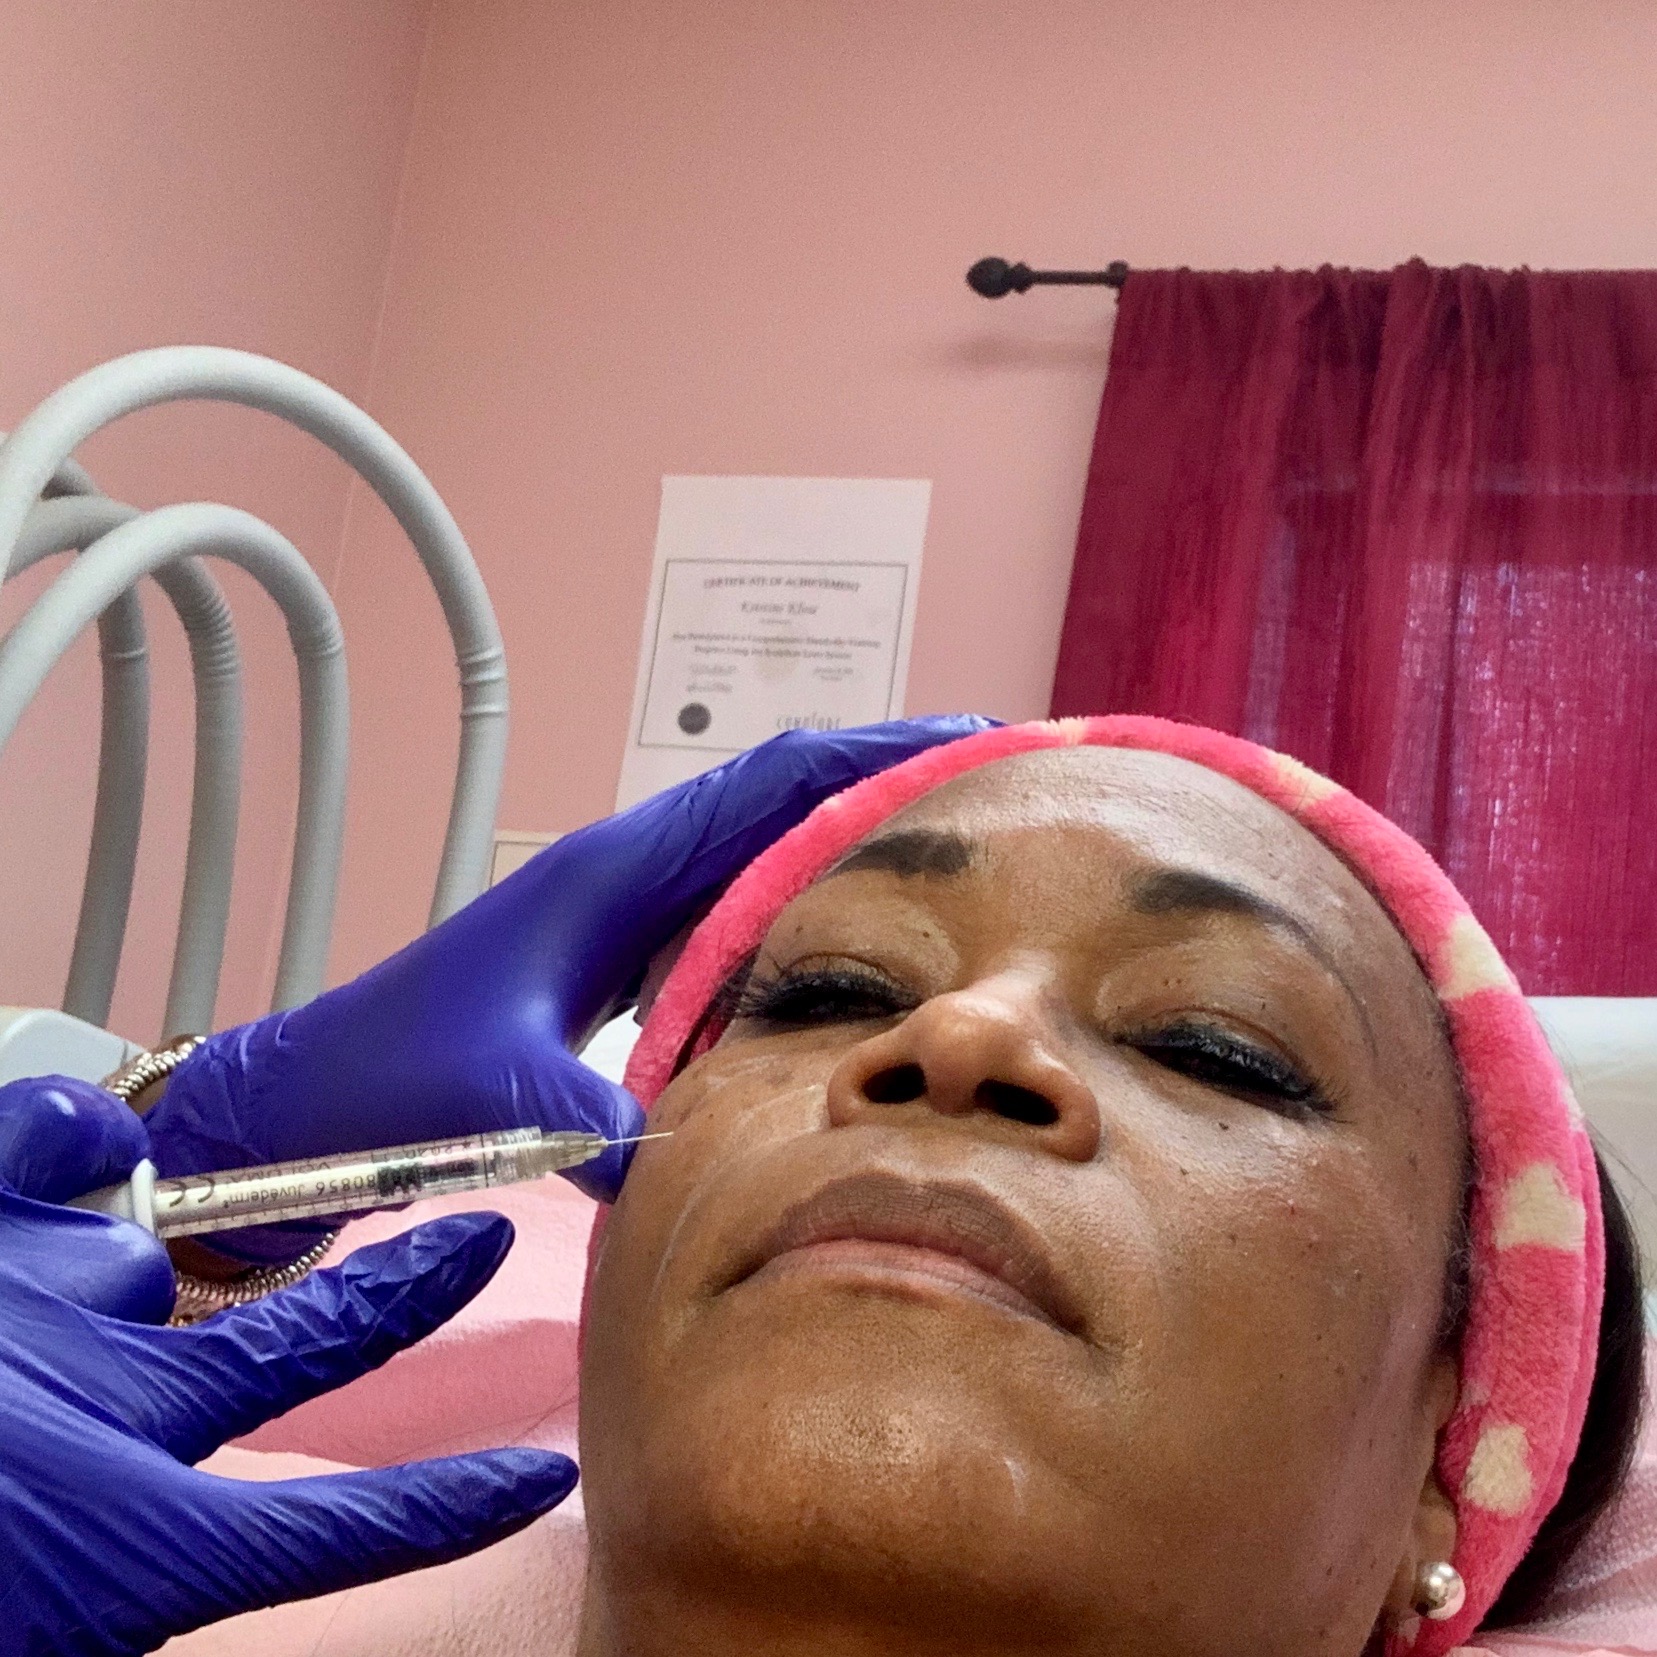 My First Juvéderm Injection at CD Aesthics & Wellness, Harrisburg, PA